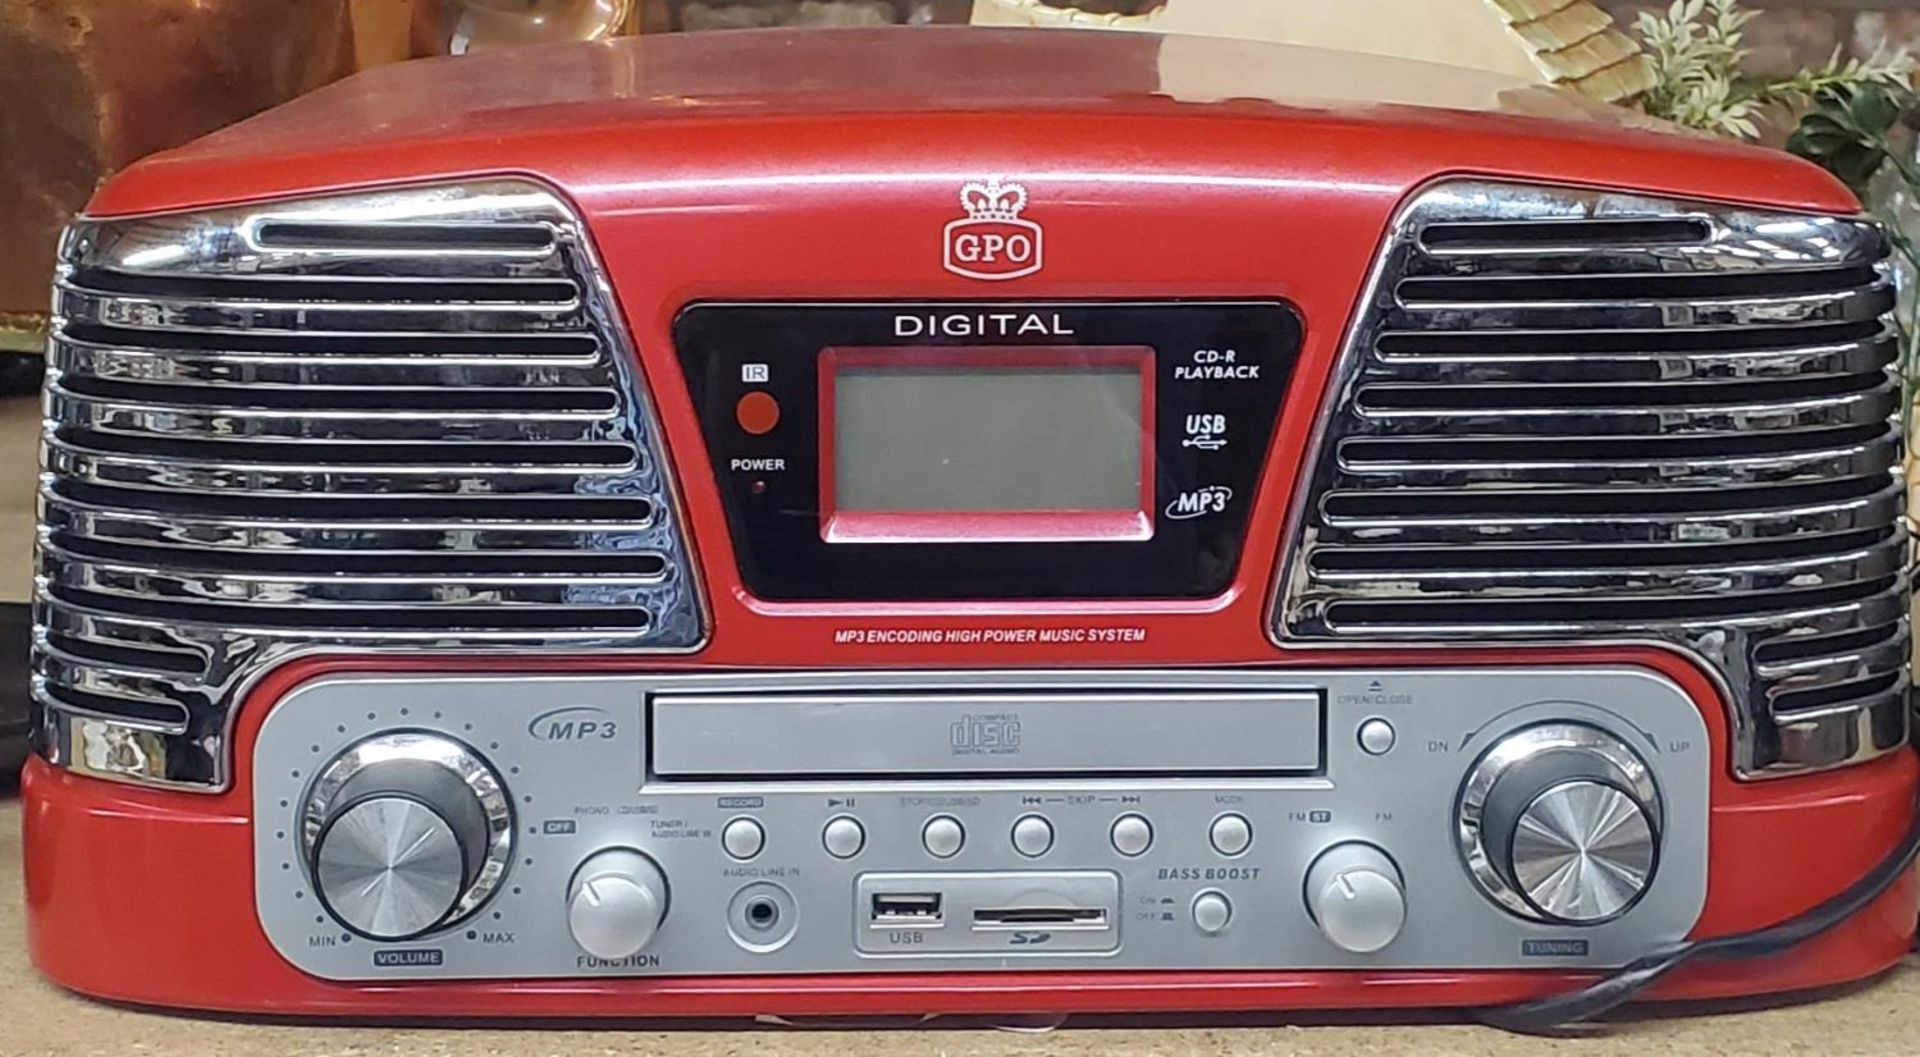 AN AS NEW RED GPO RECORRD/COMPACT DISC PLAYER